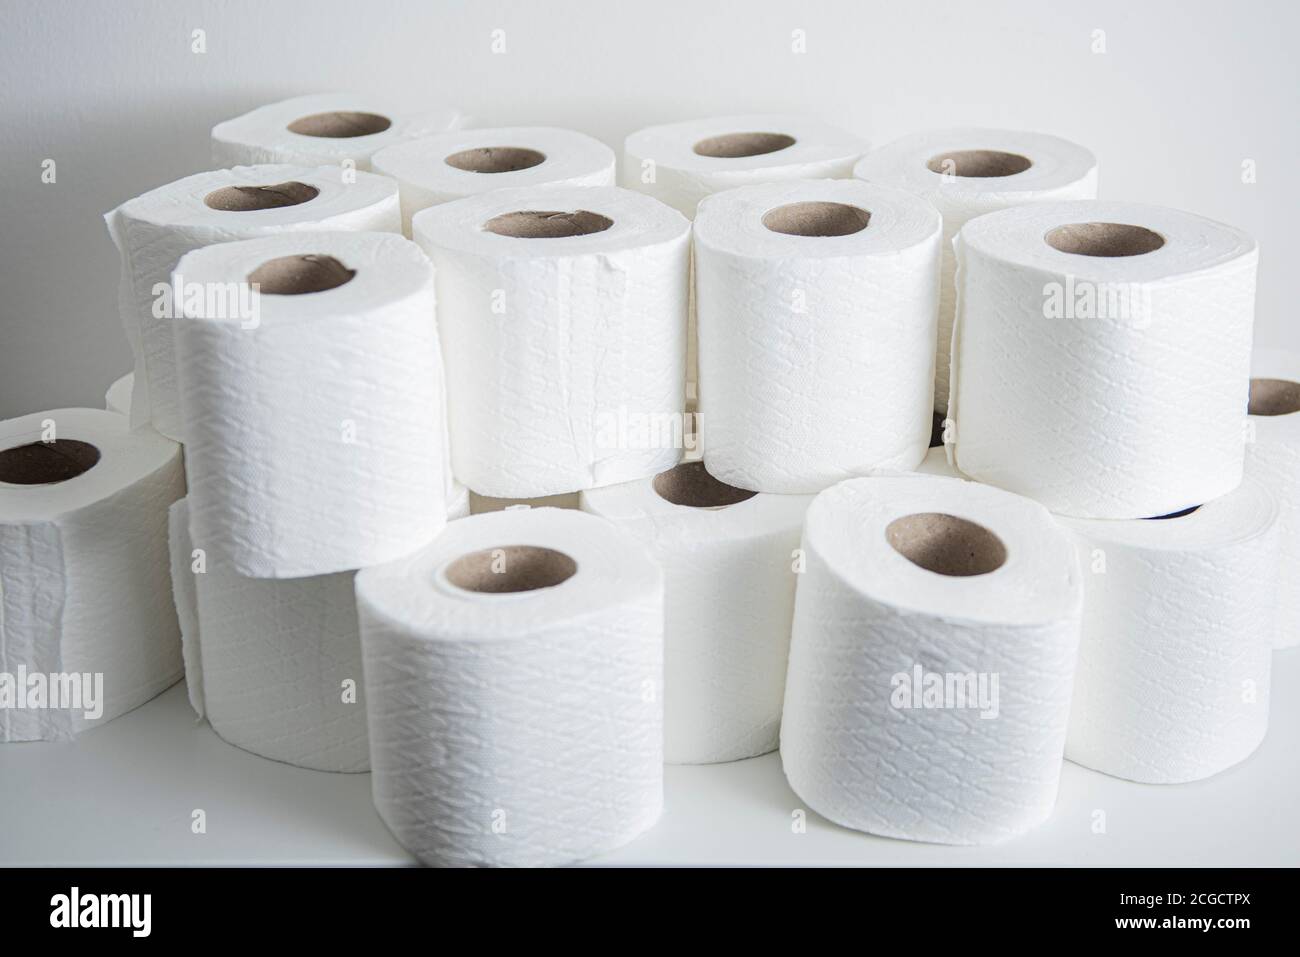 Stacked rolls of toilet paper Stock Photo - Alamy